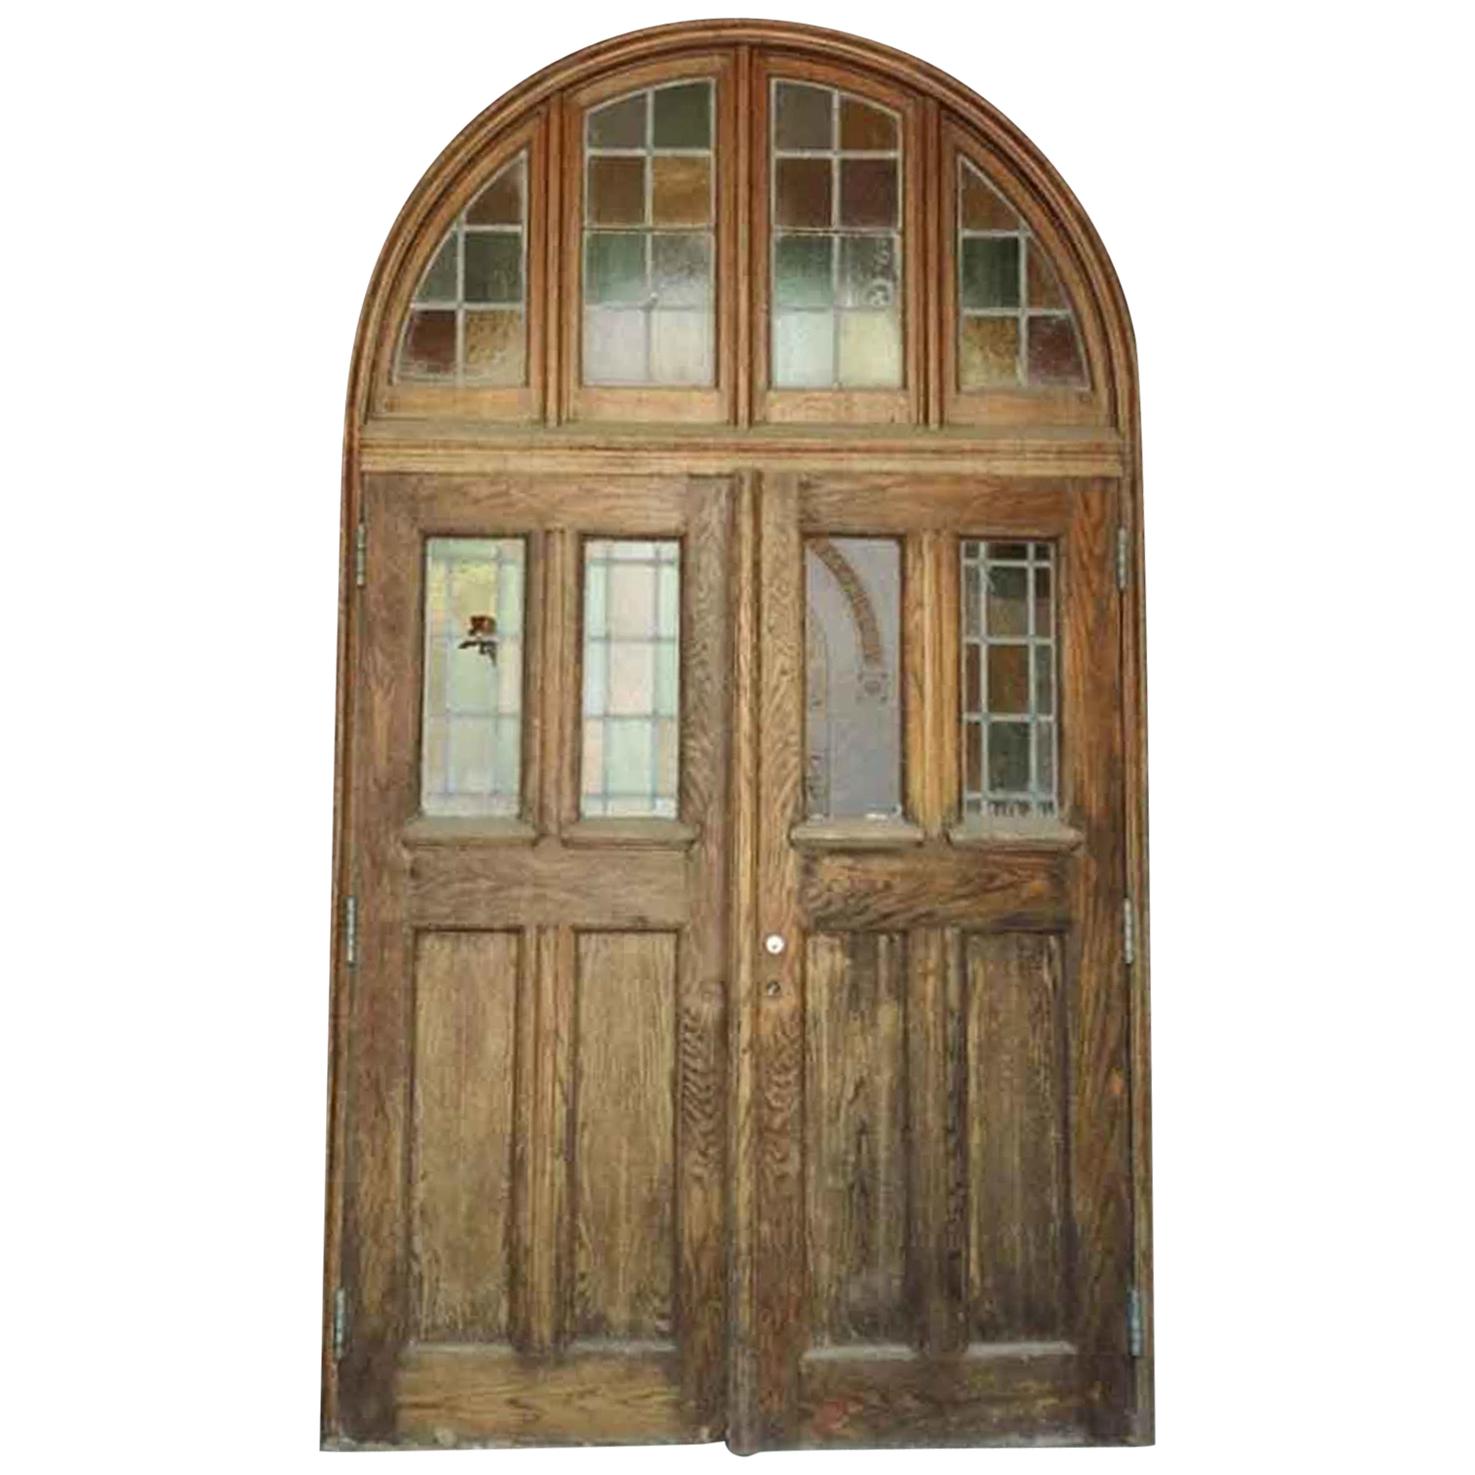 1928 Tudor Entrance to Rose Hill Chapel with Leaded Doors